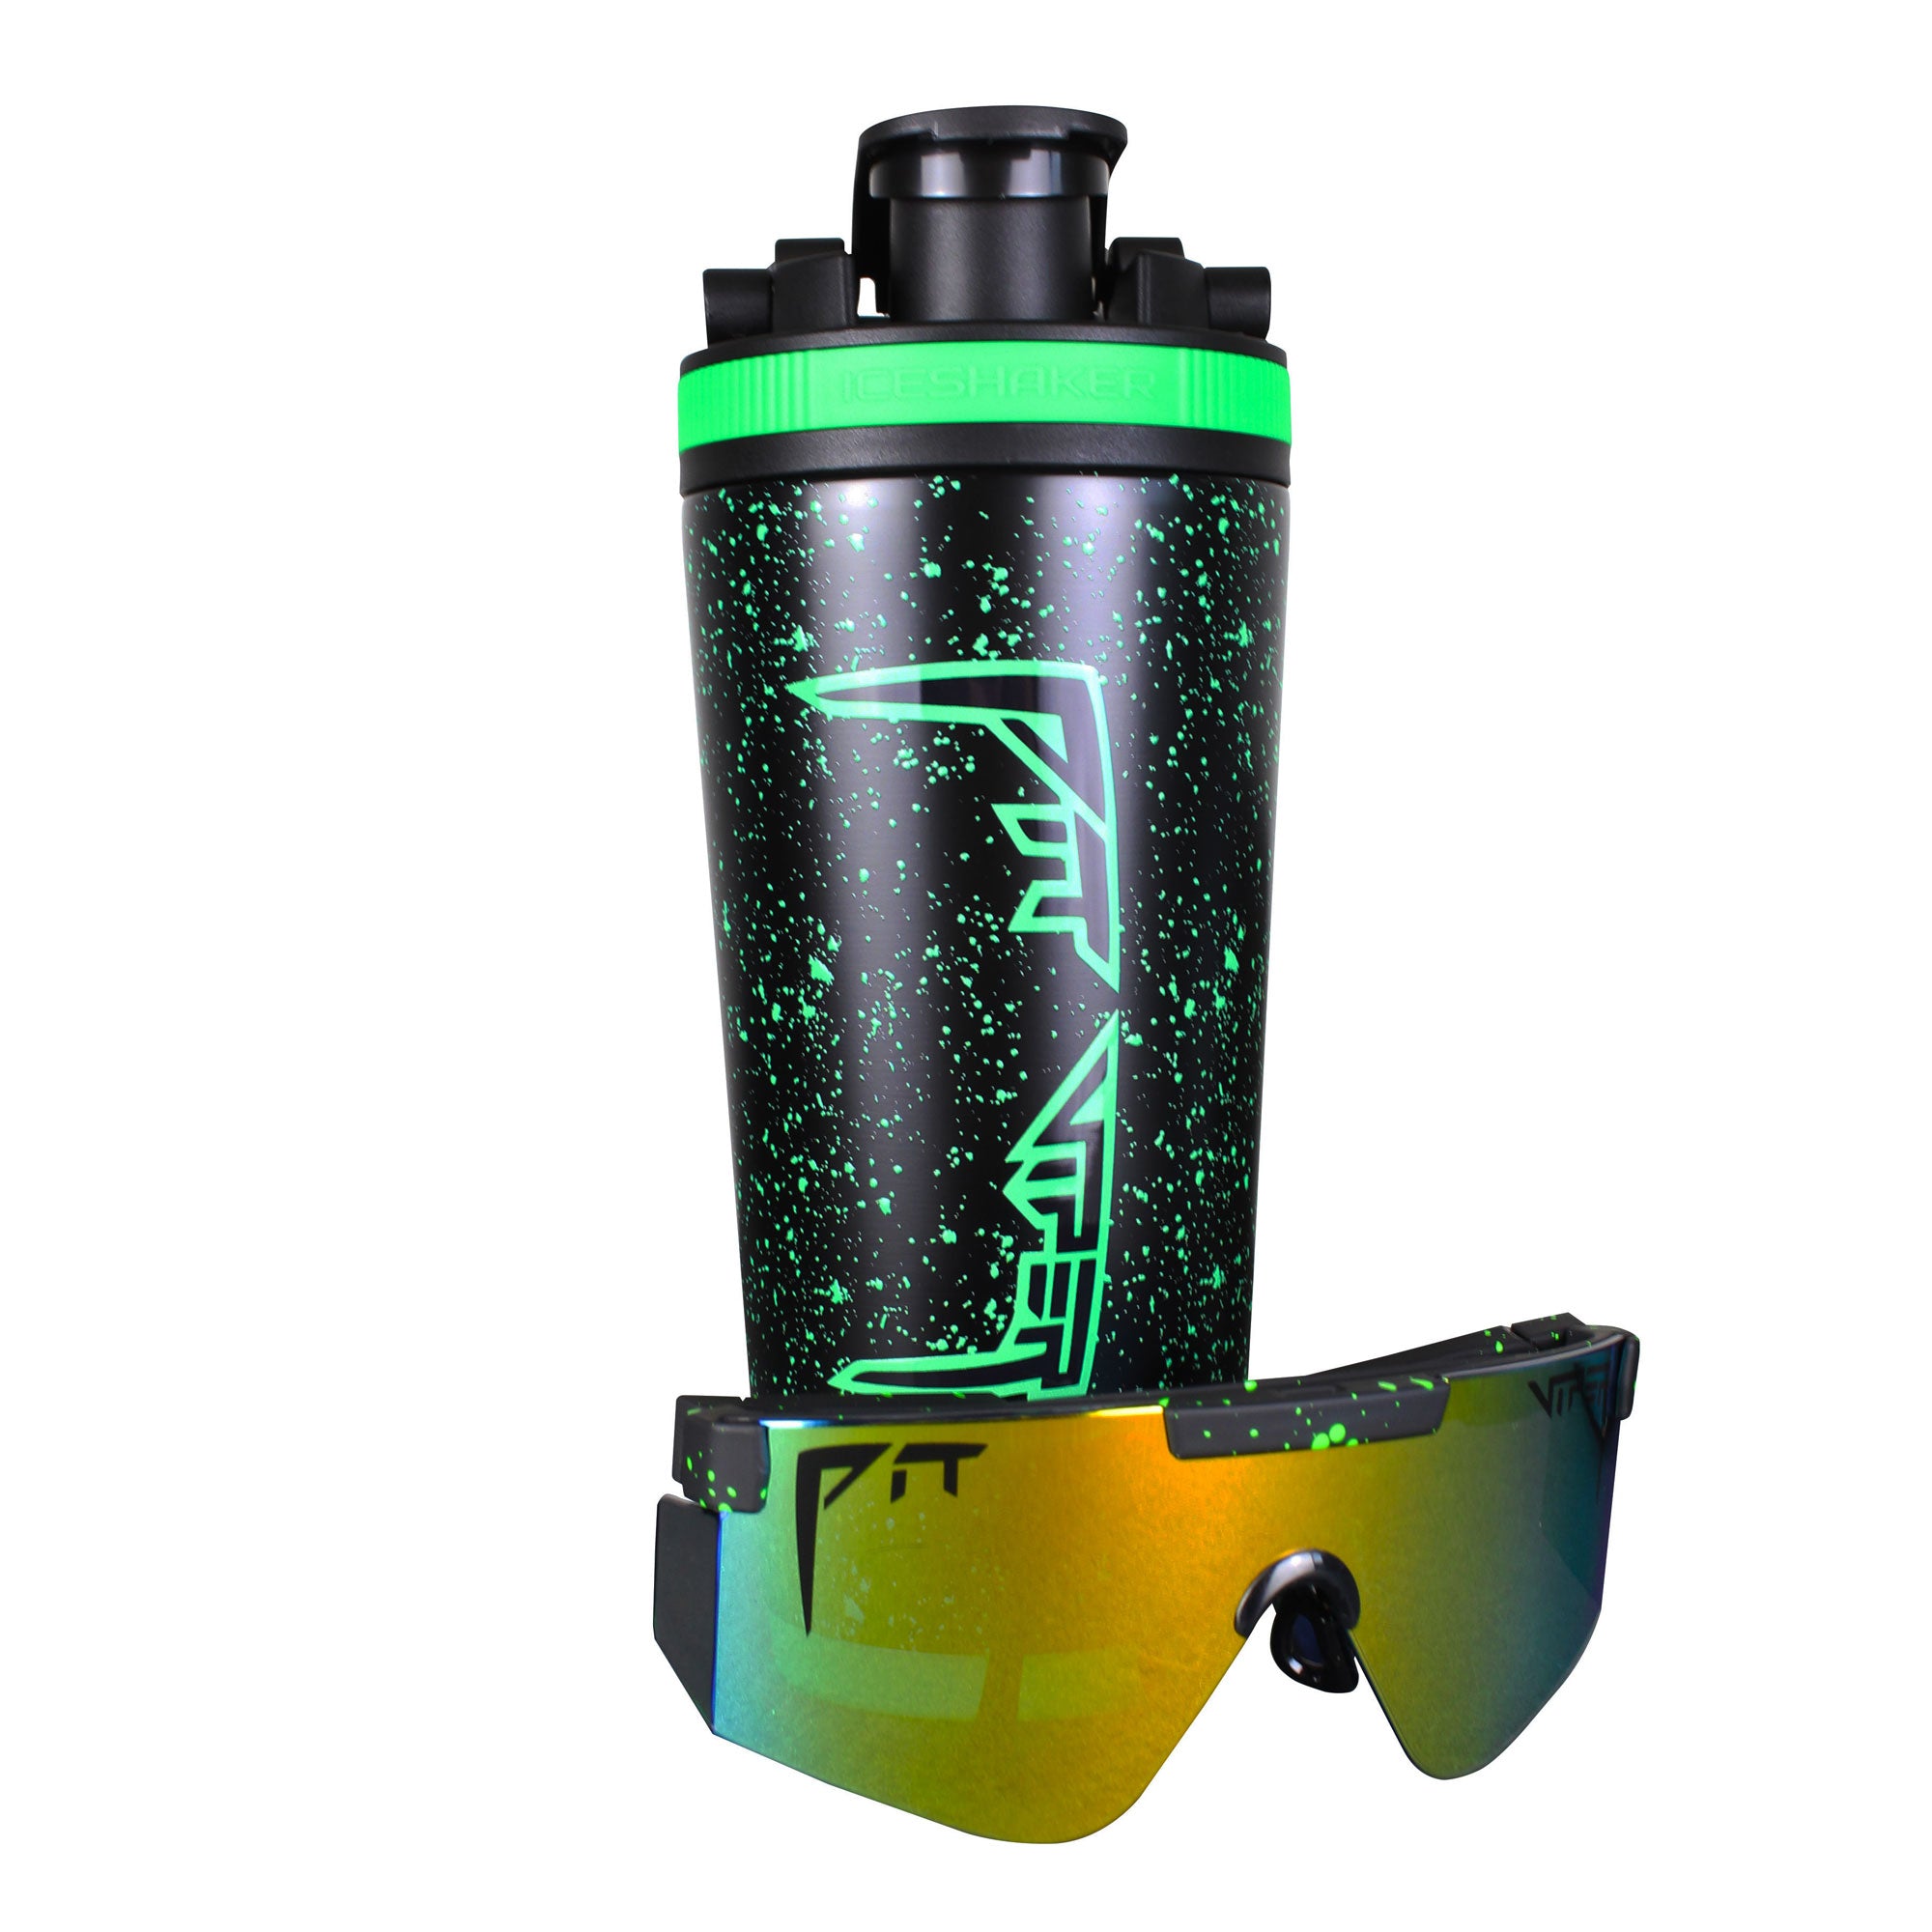 Ice Shaker and Pit Viper create a shaker bottle and sunglasses kit